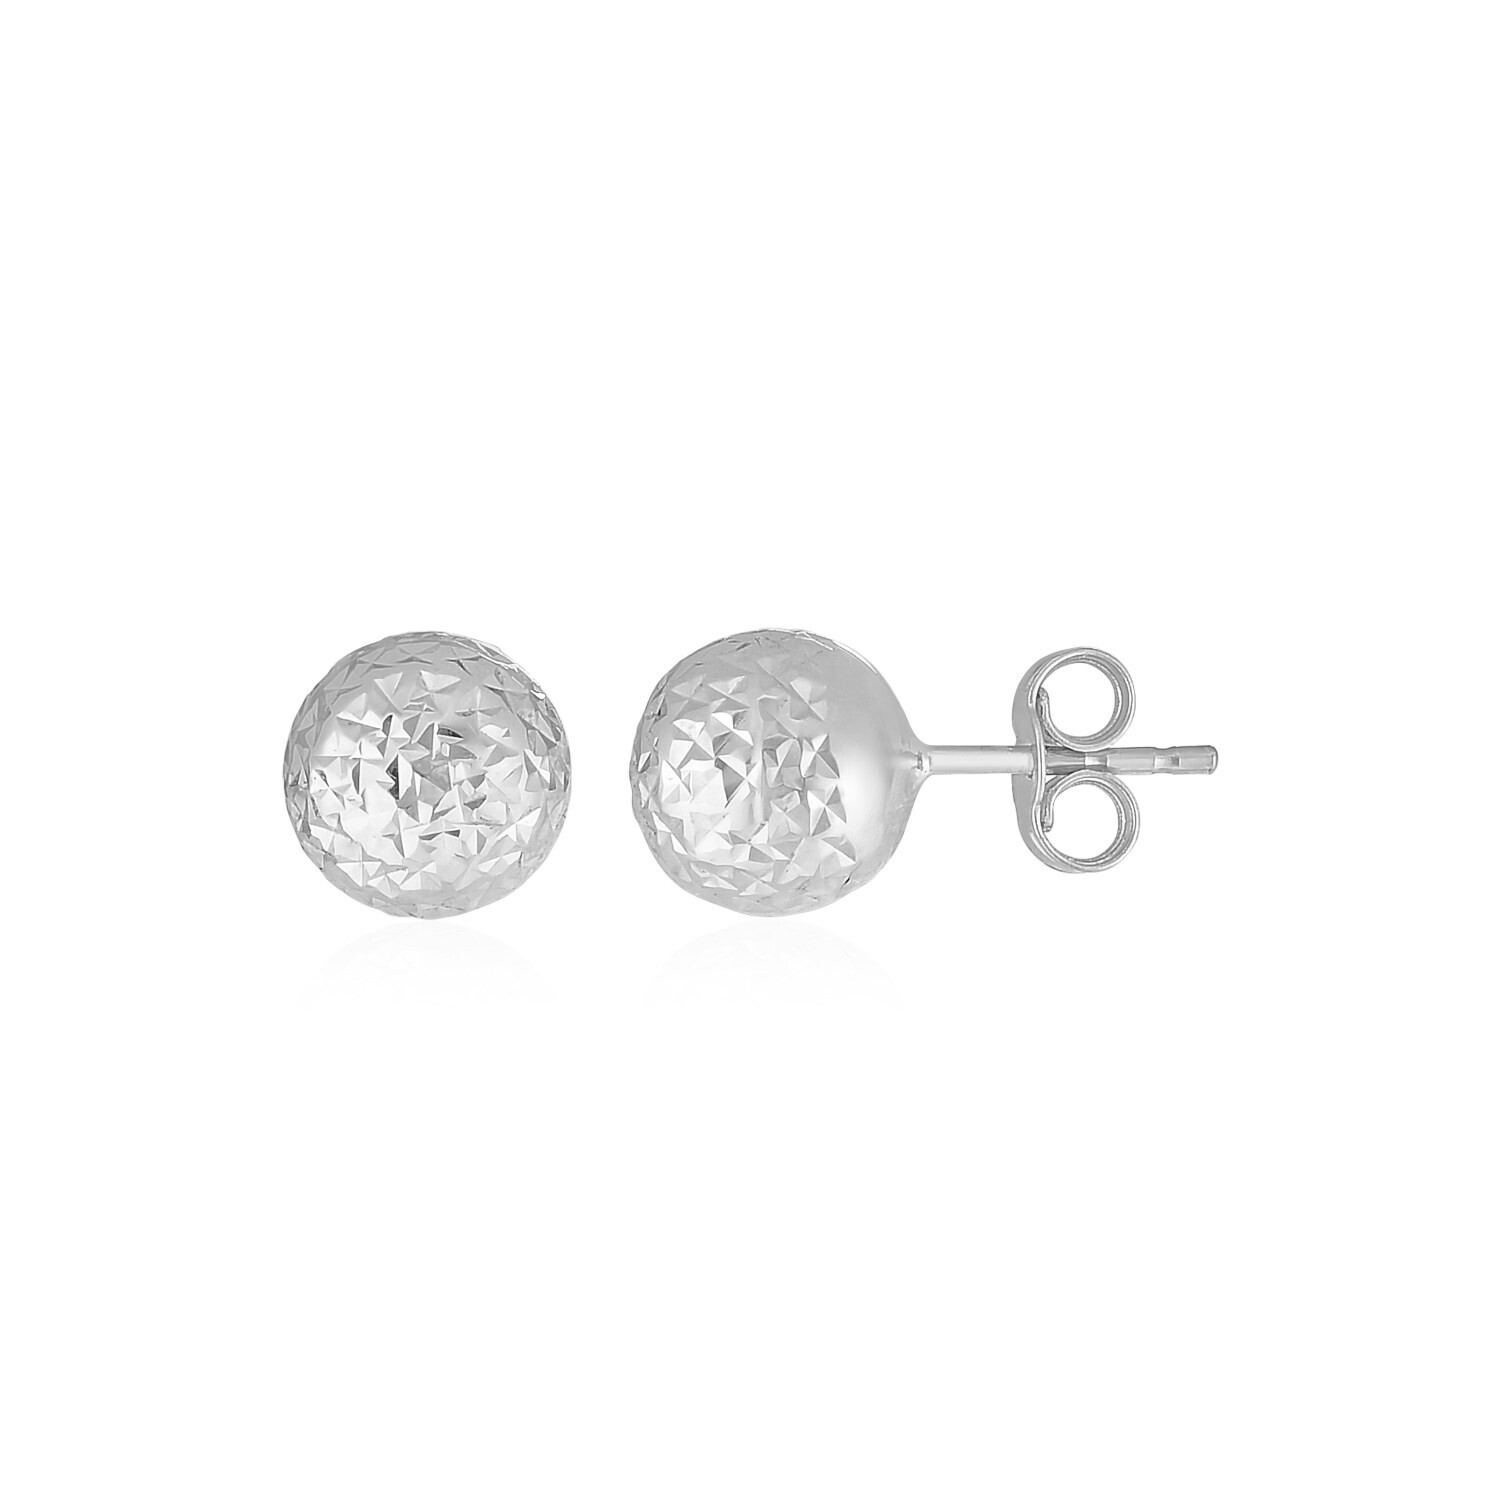 14k White Gold Ball Earrings with Crystal Cut Texture